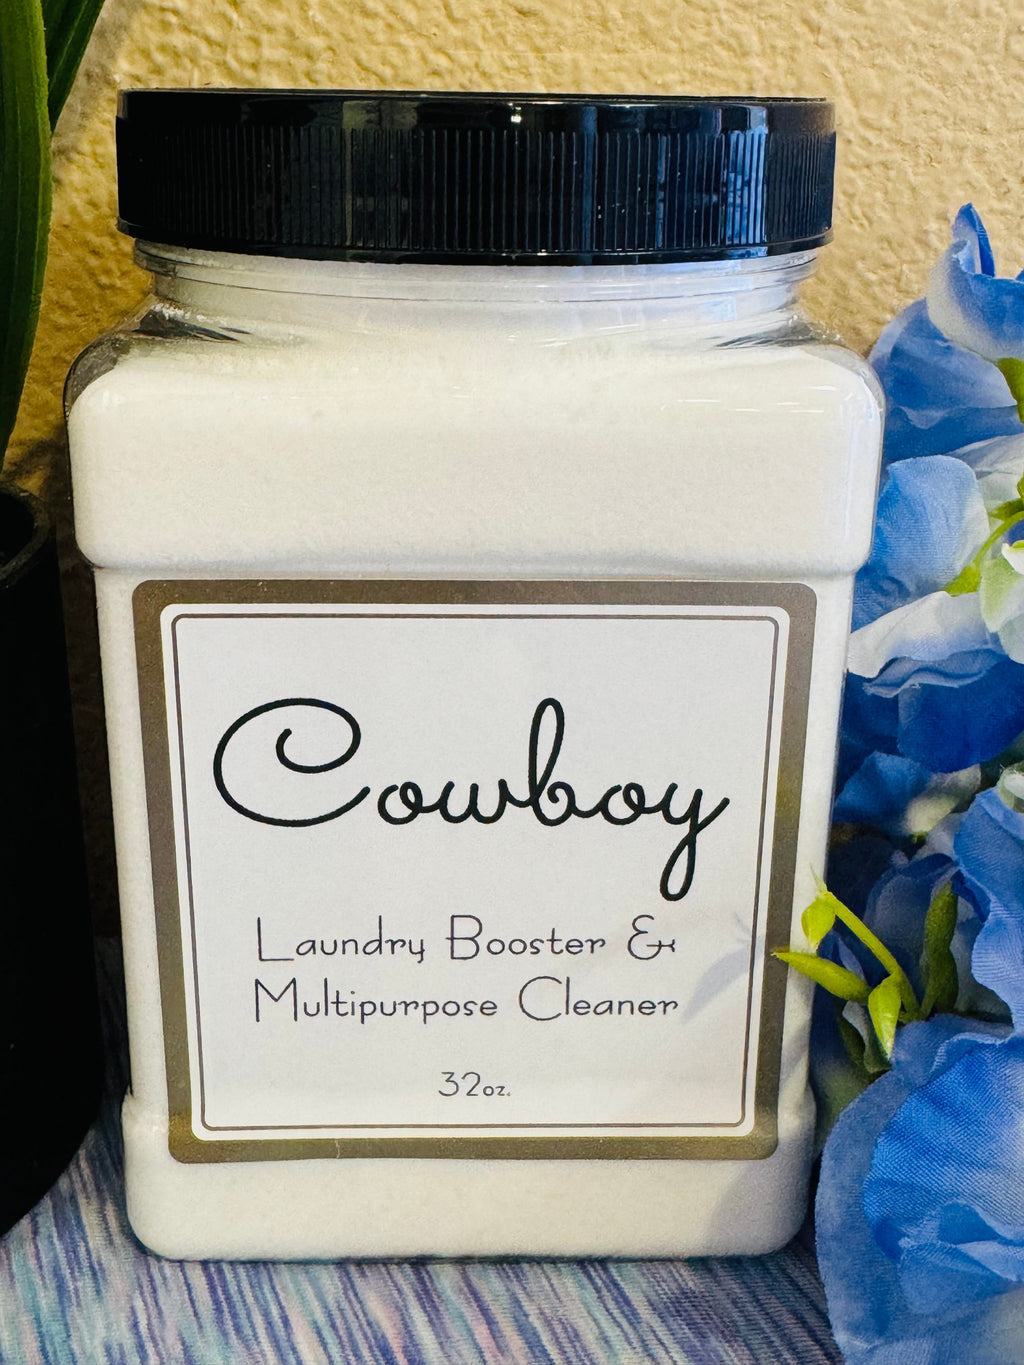 Cowboy Laundry Booster & Multipurpose Cleaner